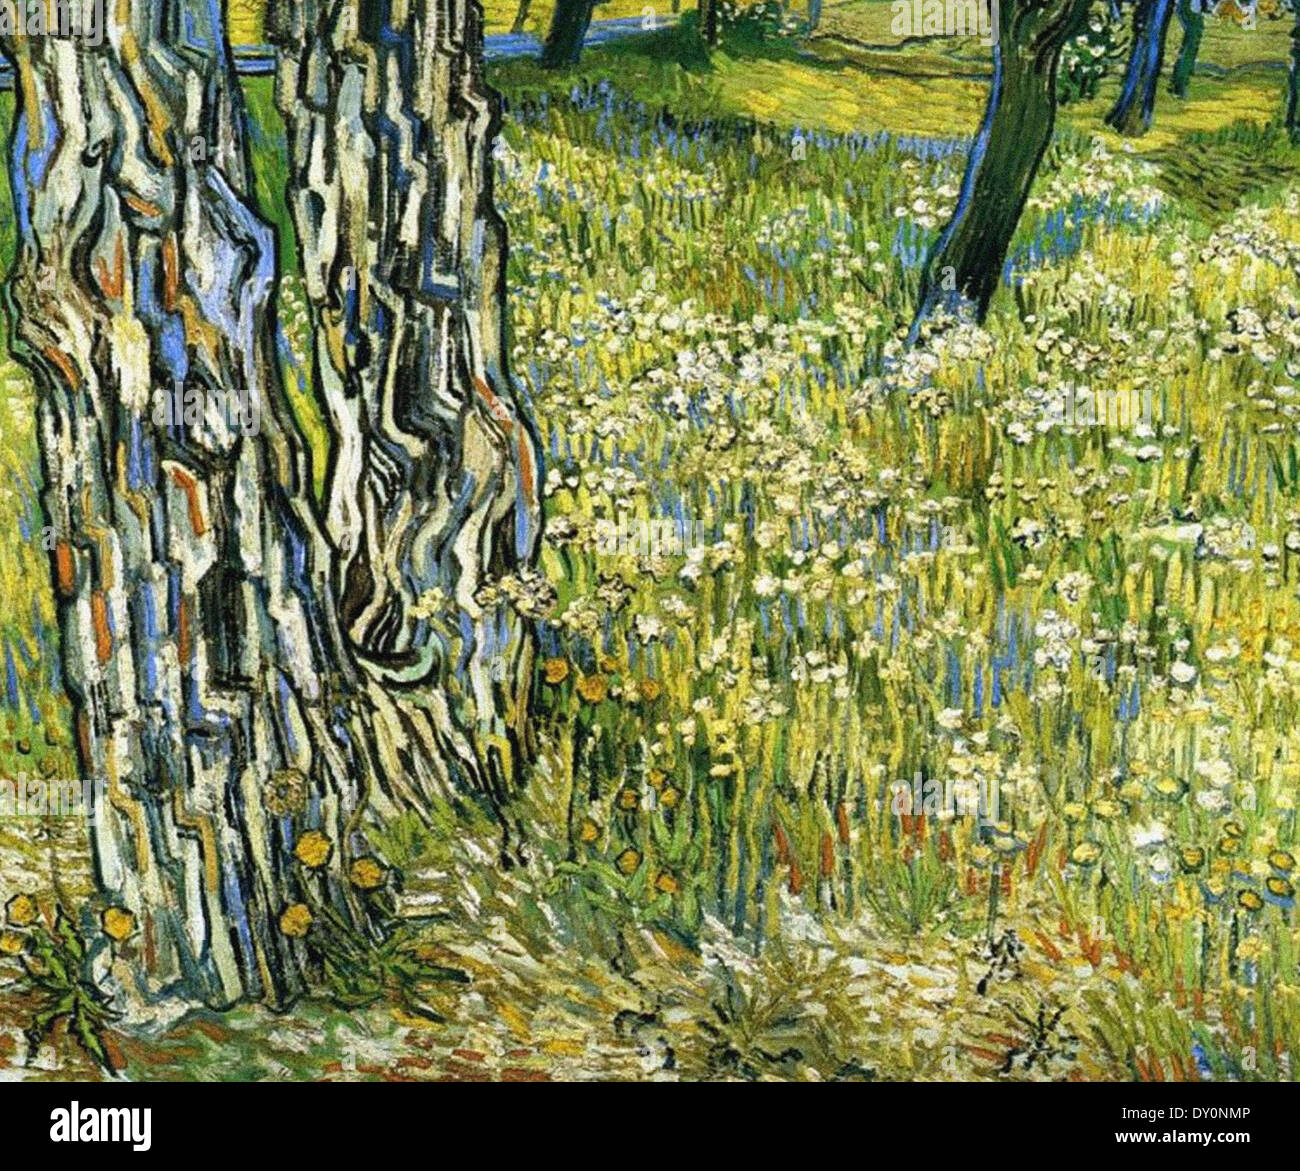 Vincent Van Gogh Tree Trunks In The Grass Stock Photo Alamy